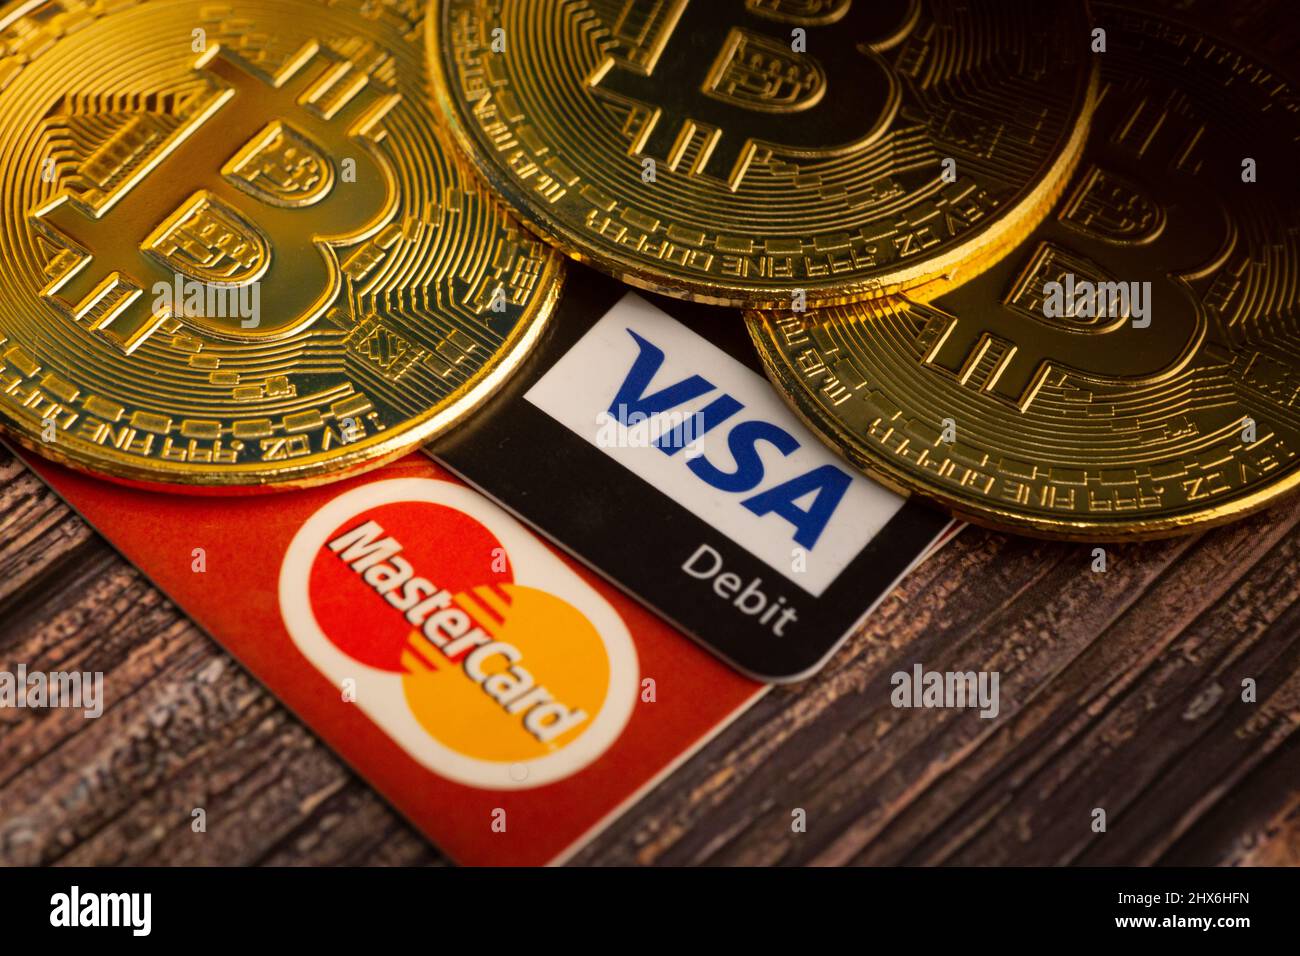 Bayan Lepas, Penang, Malaysia - January 2 2022: Golden Bitcoin with Visa and Mastercard logo token on a wooden background. Digital currency. Stock Photo